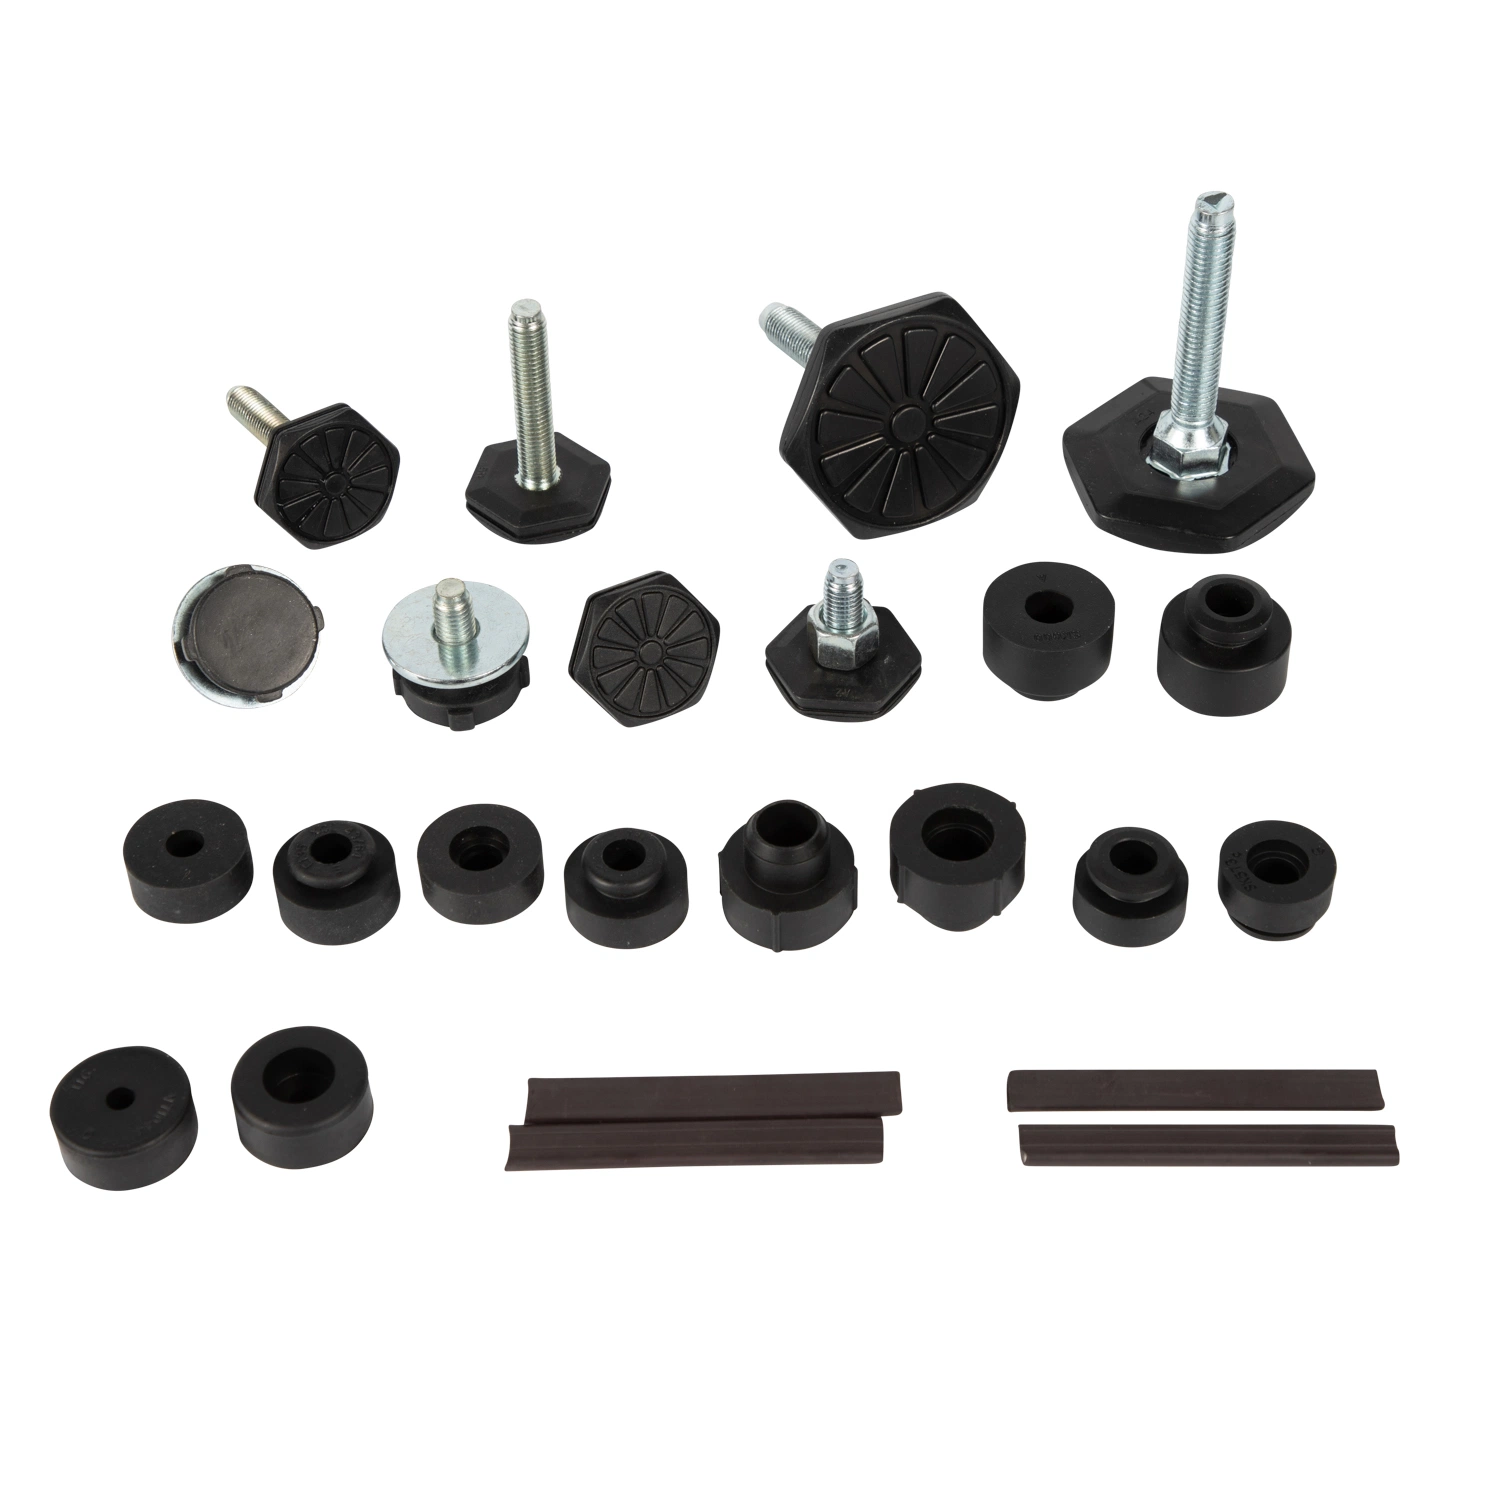 Factory Manufacture NBR / FKM / Silicone / Neoprene / EPDM Rubber Plugs Plastic Rubber Molded / Extruded / Injection Parts